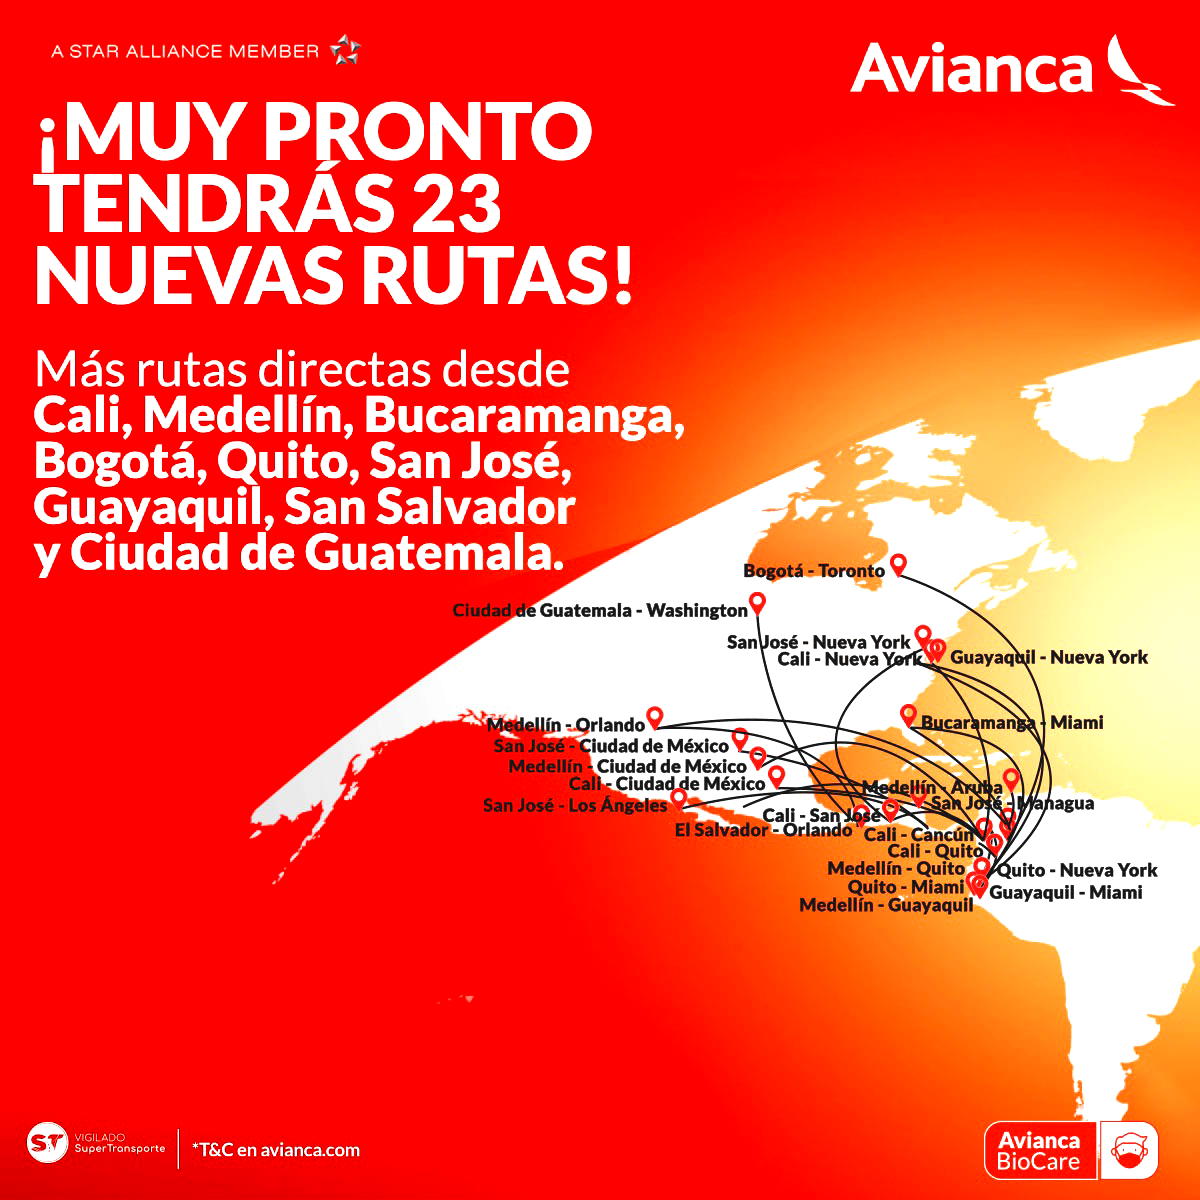 Avianca Expands Internationally With New US Routes One Mile at a Time